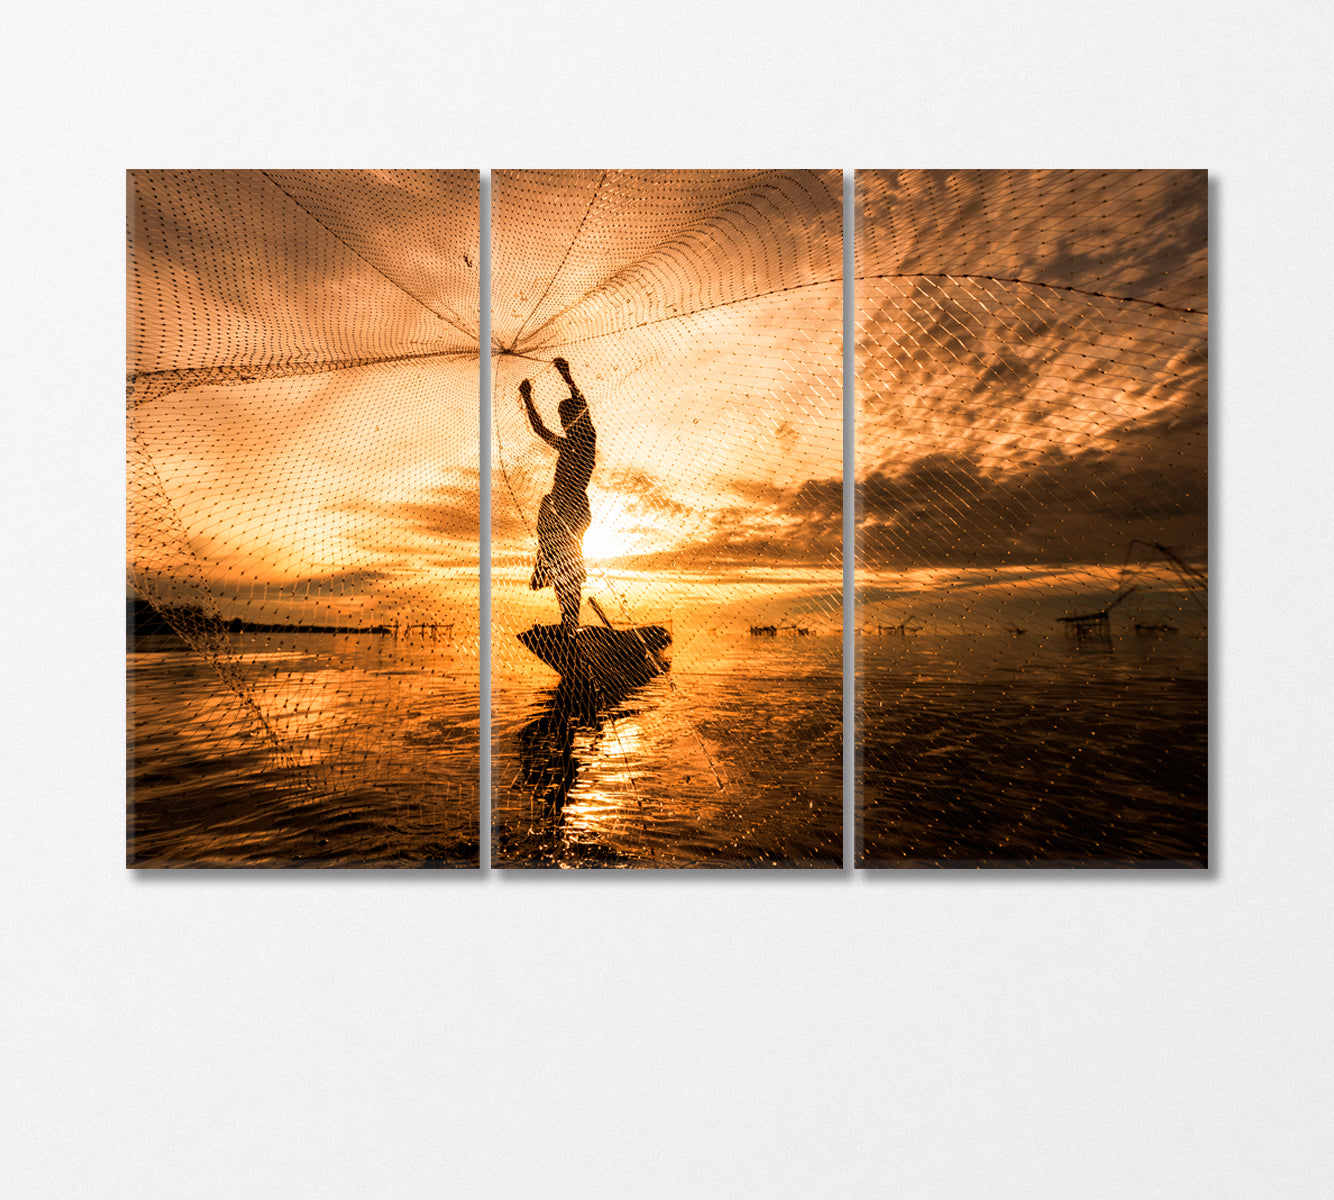 Fisherman Silhouette on Boat with Fishing Net Canvas Print-Canvas Print-CetArt-3 Panels-36x24 inches-CetArt